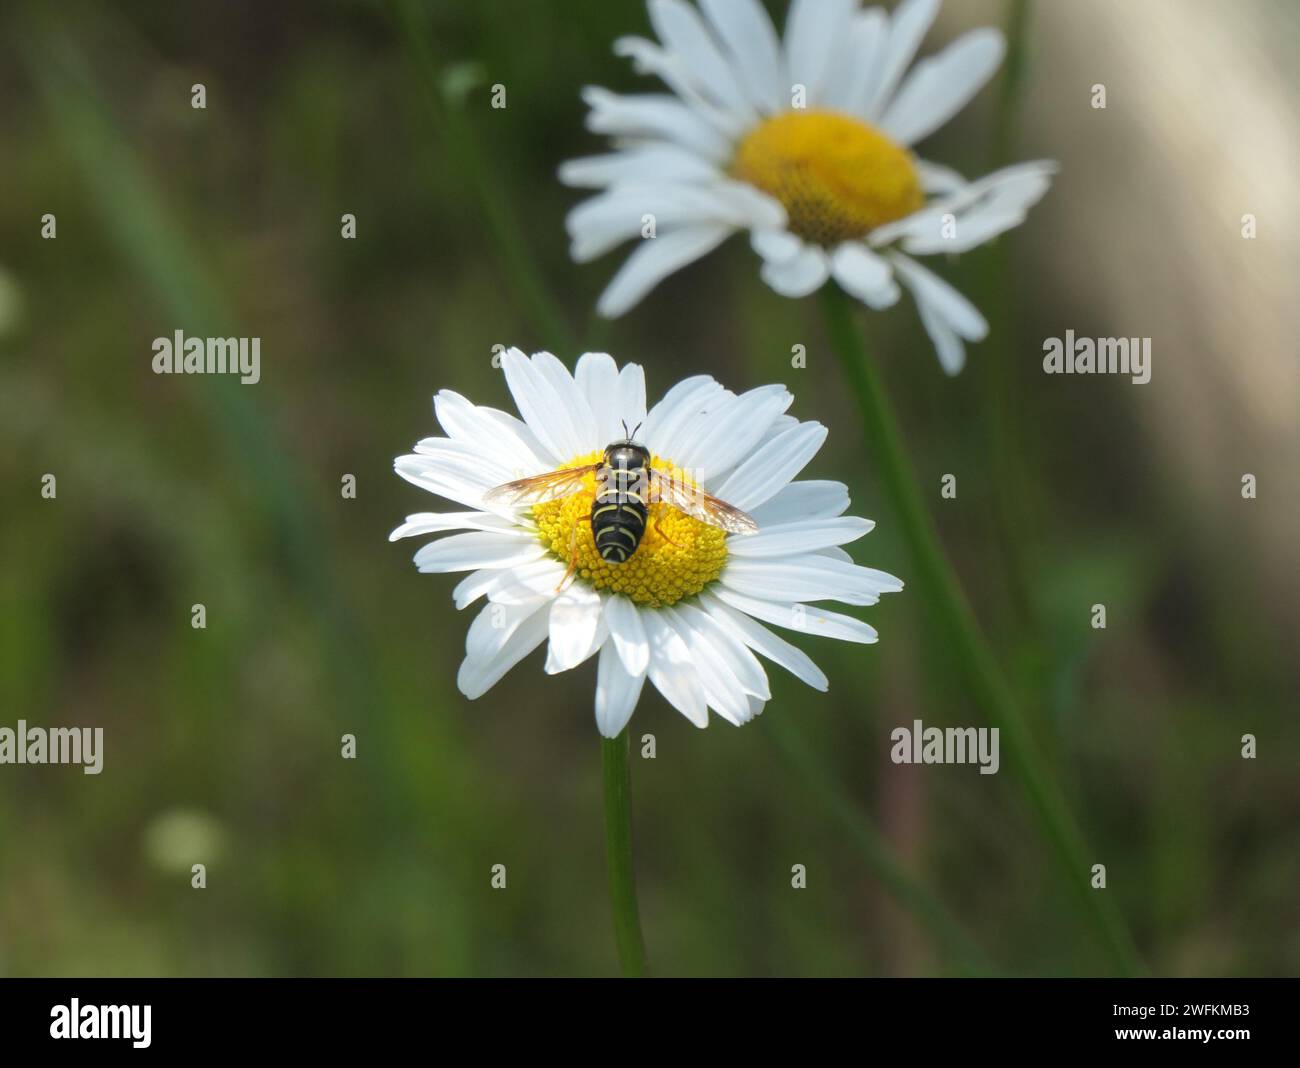 The hoverfly sitting in the center of daisy flower Stock Photo